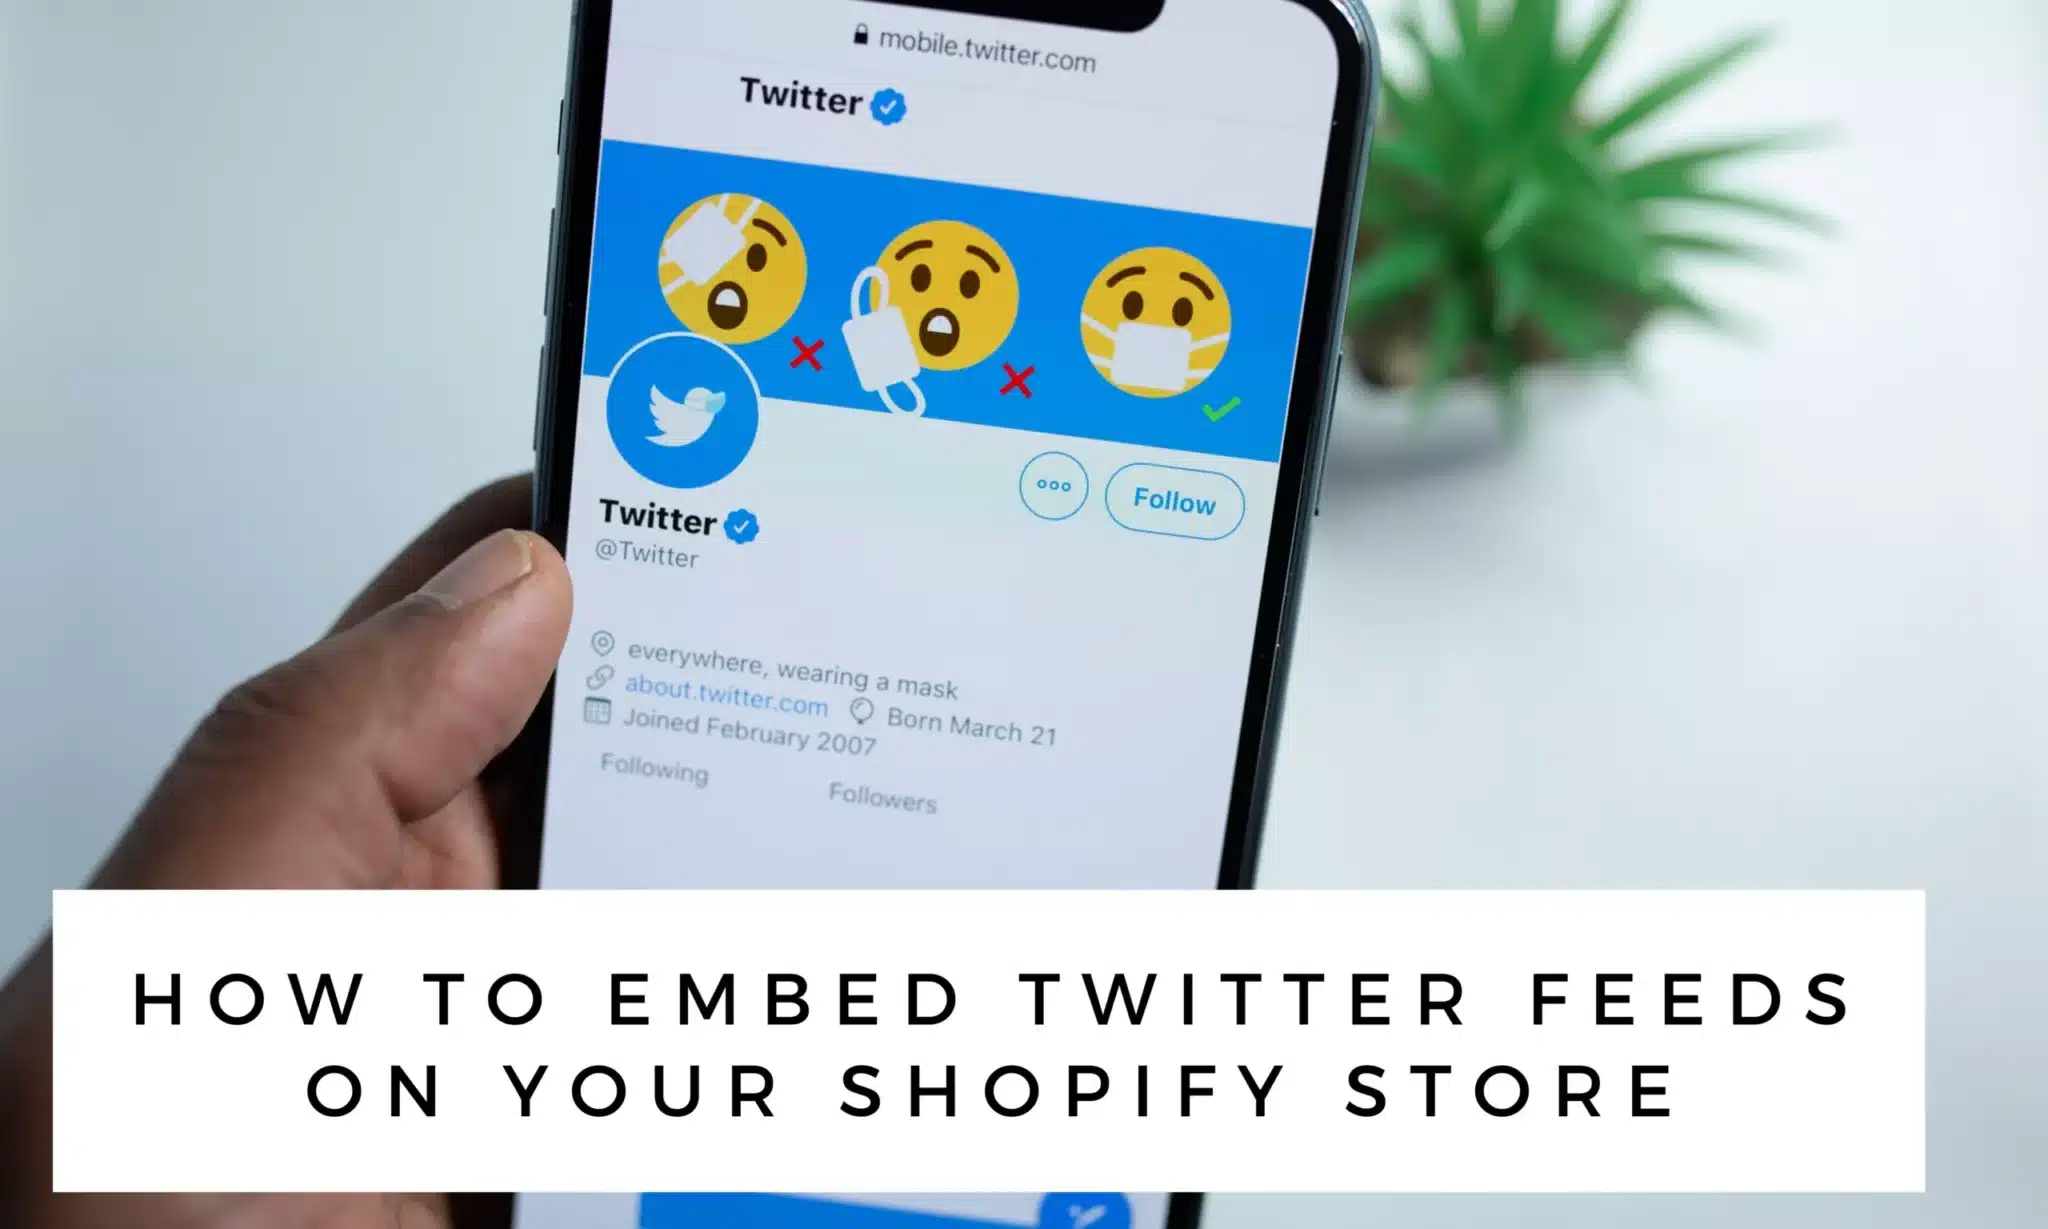 How to Embed Twitter Feeds on your Shopify Store